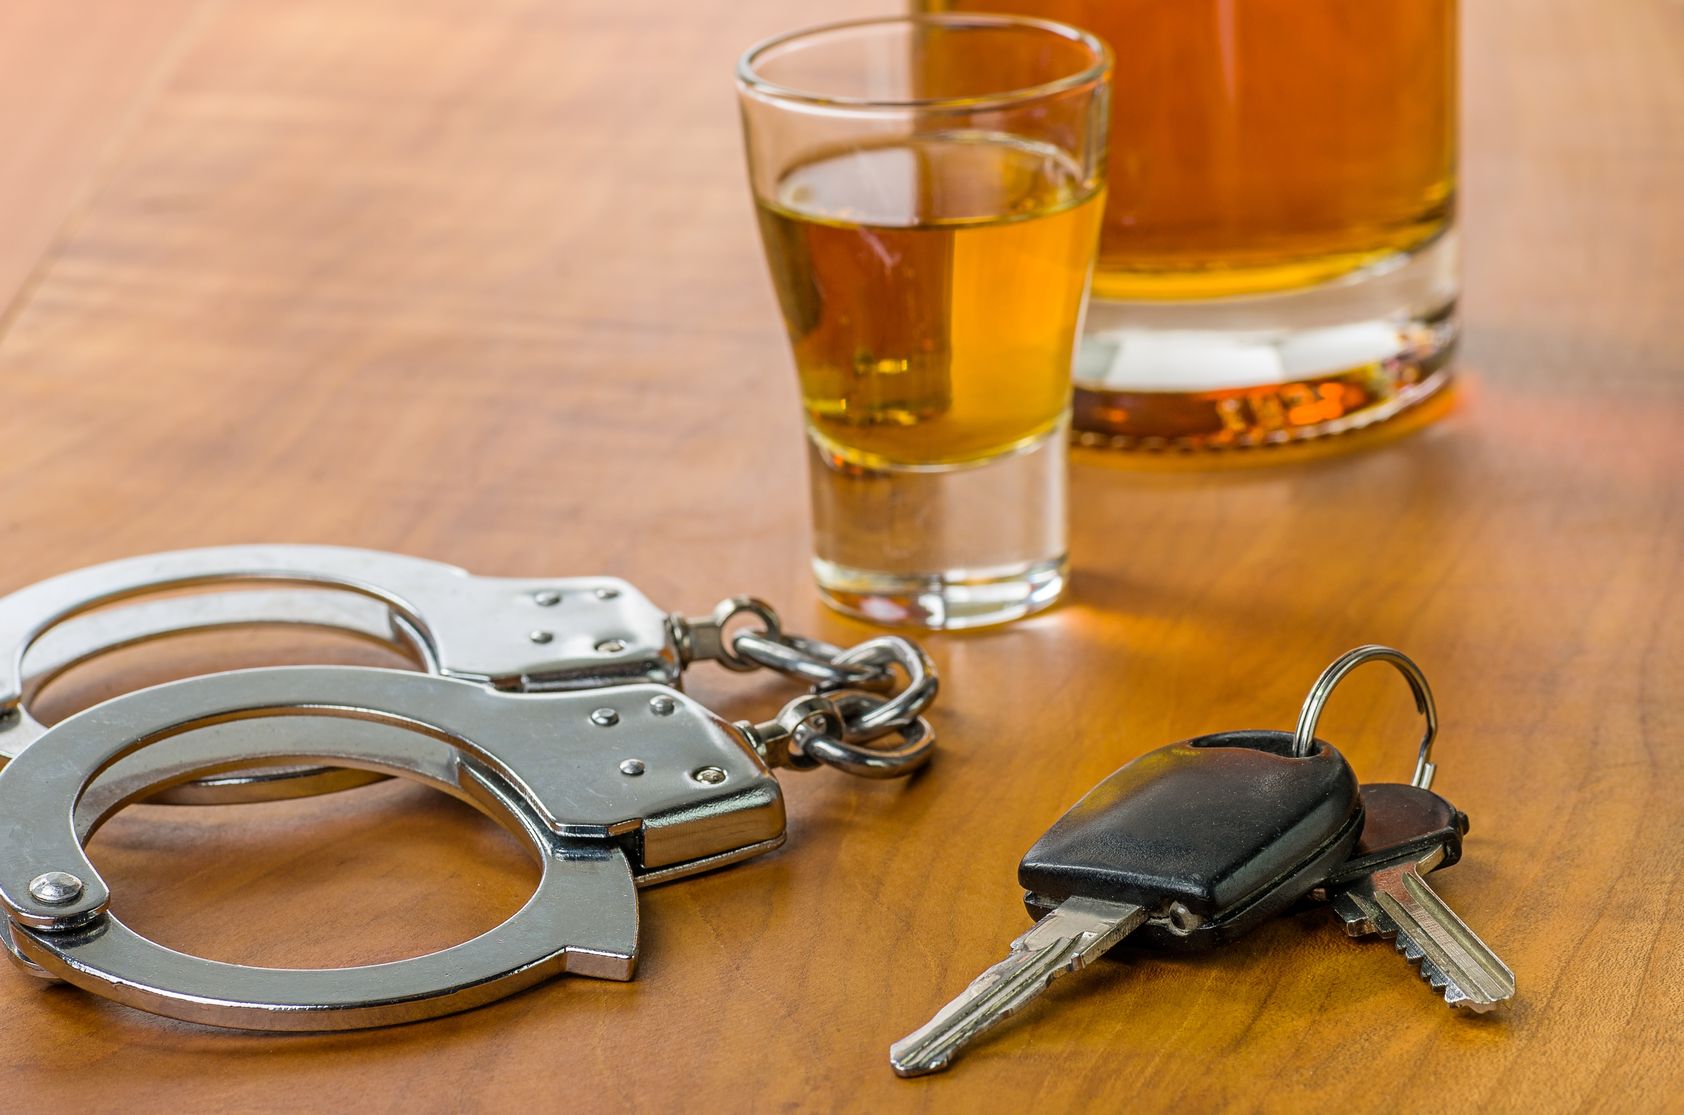 Who's the most affordable DUI Lawyer in SD? - Affordale DUI Lawyer